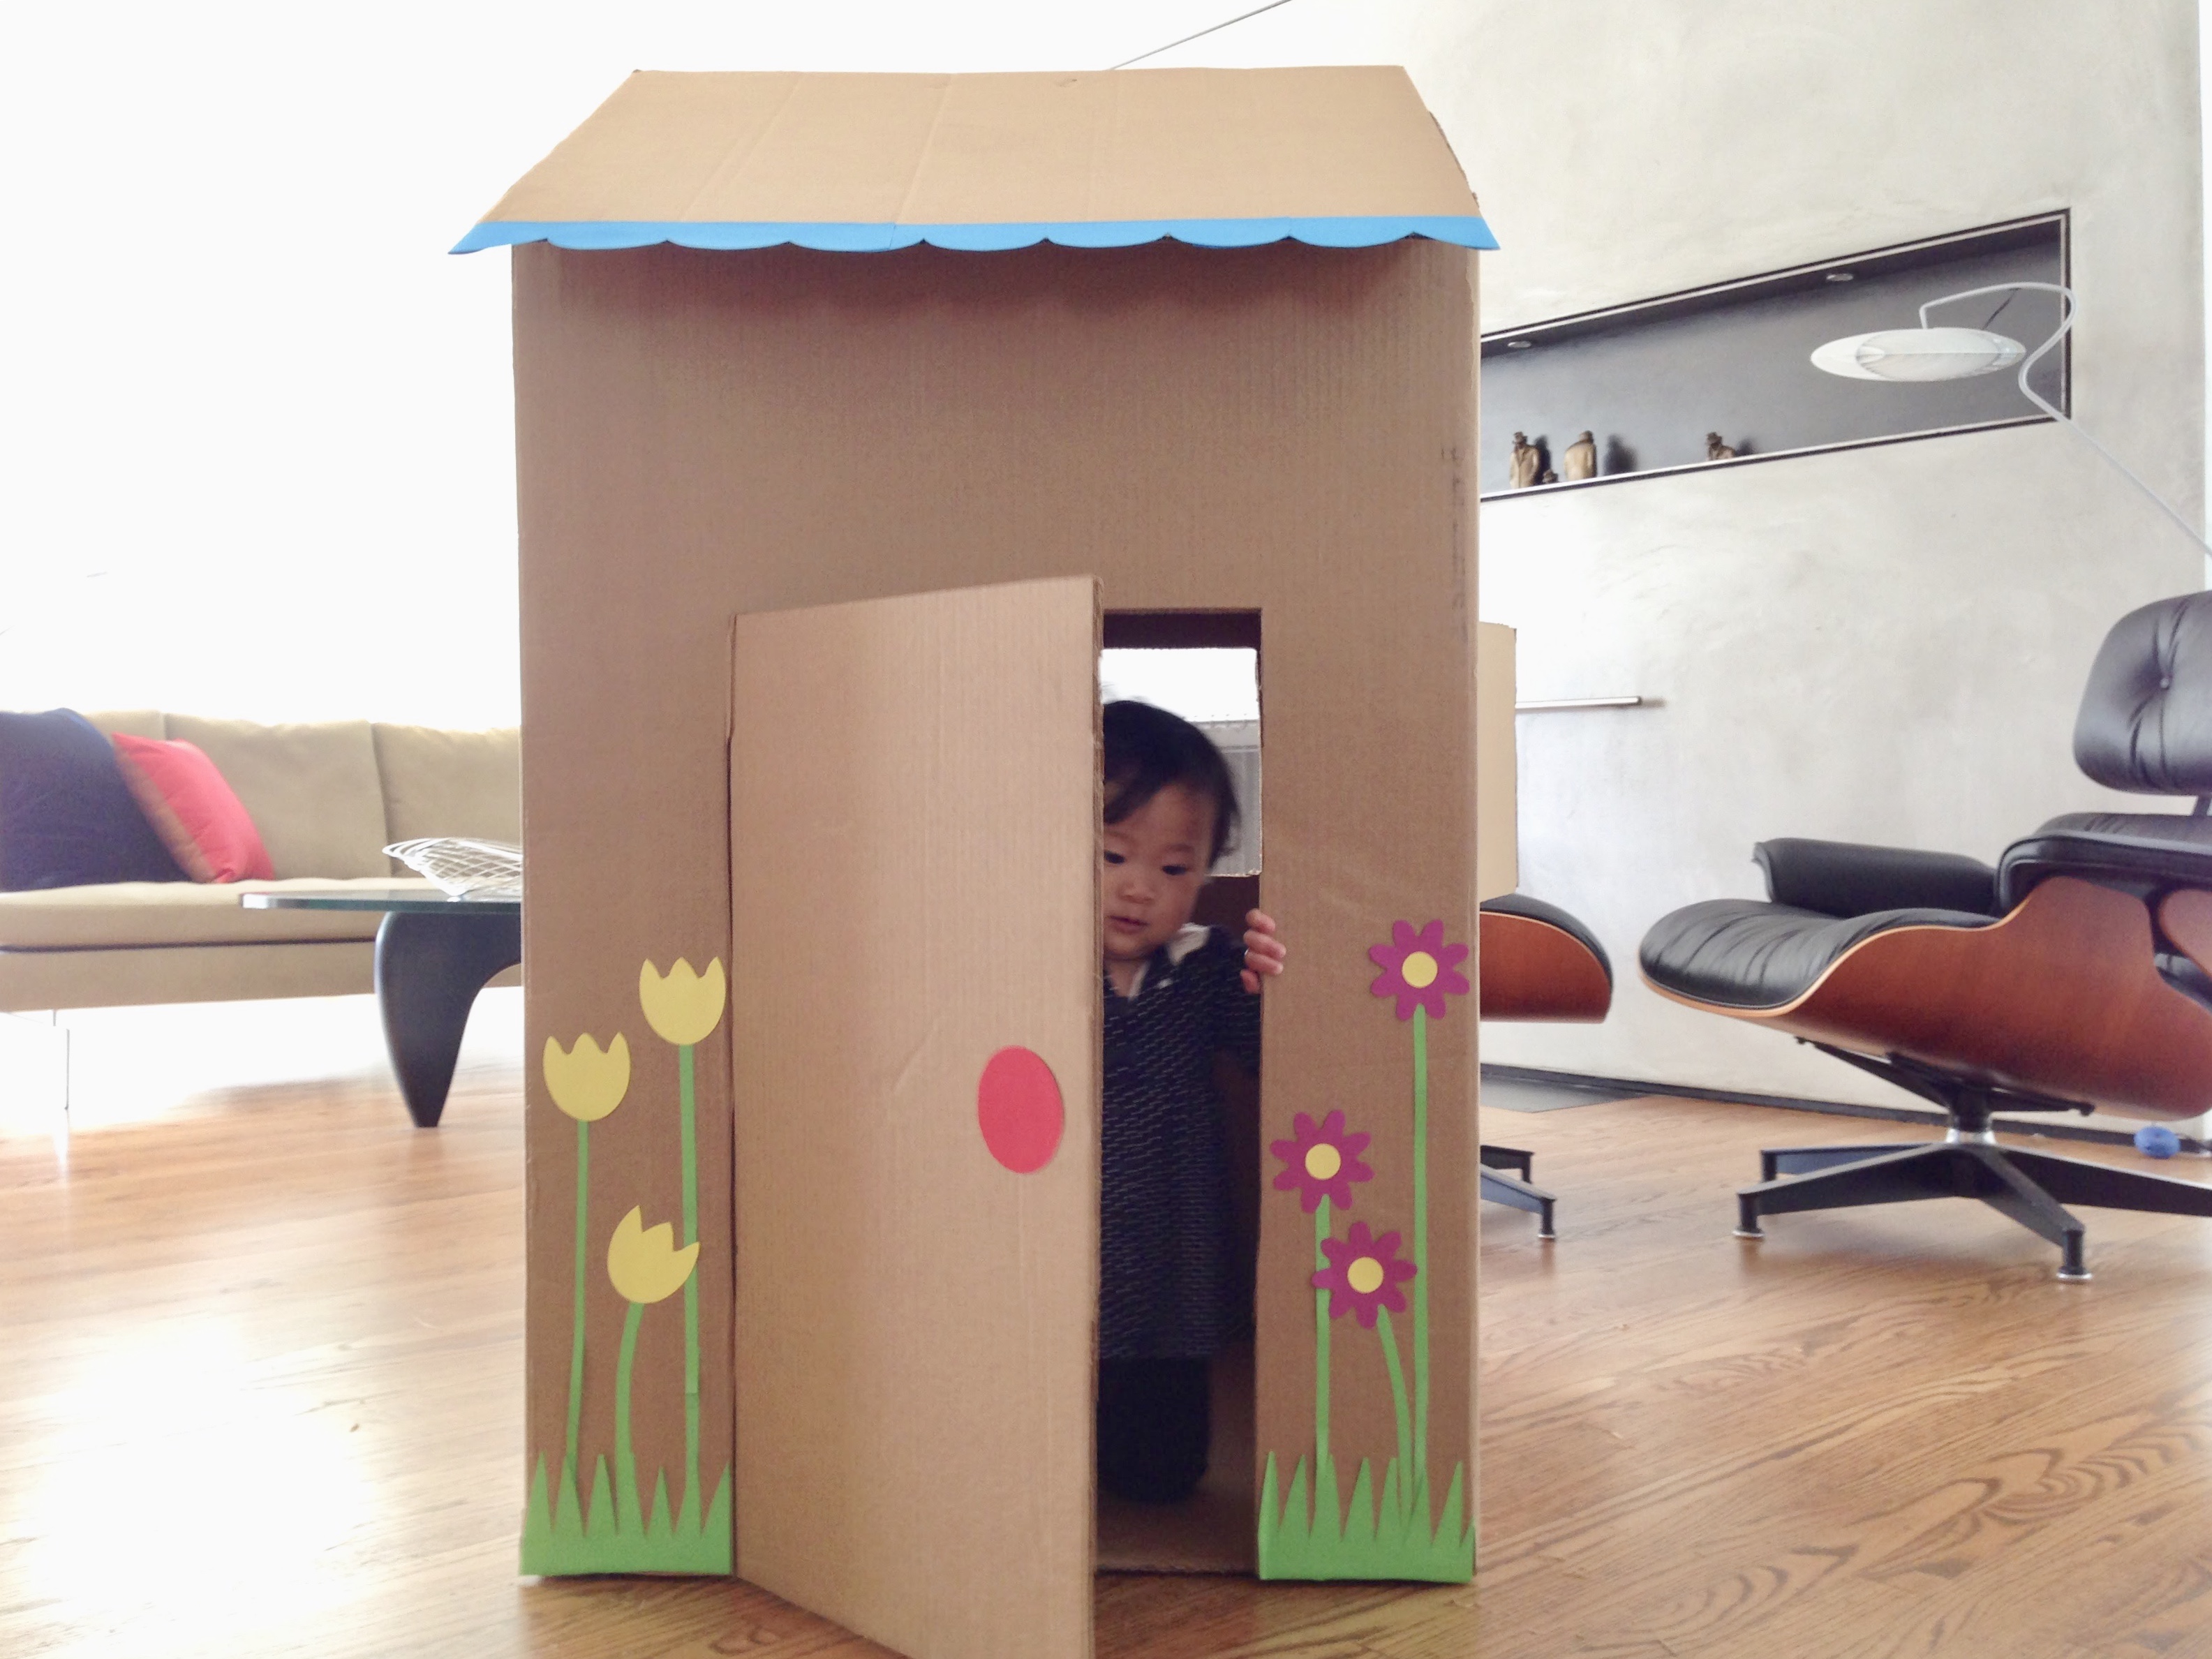 A DIY cardboard house will give a young child hours of endless fun.